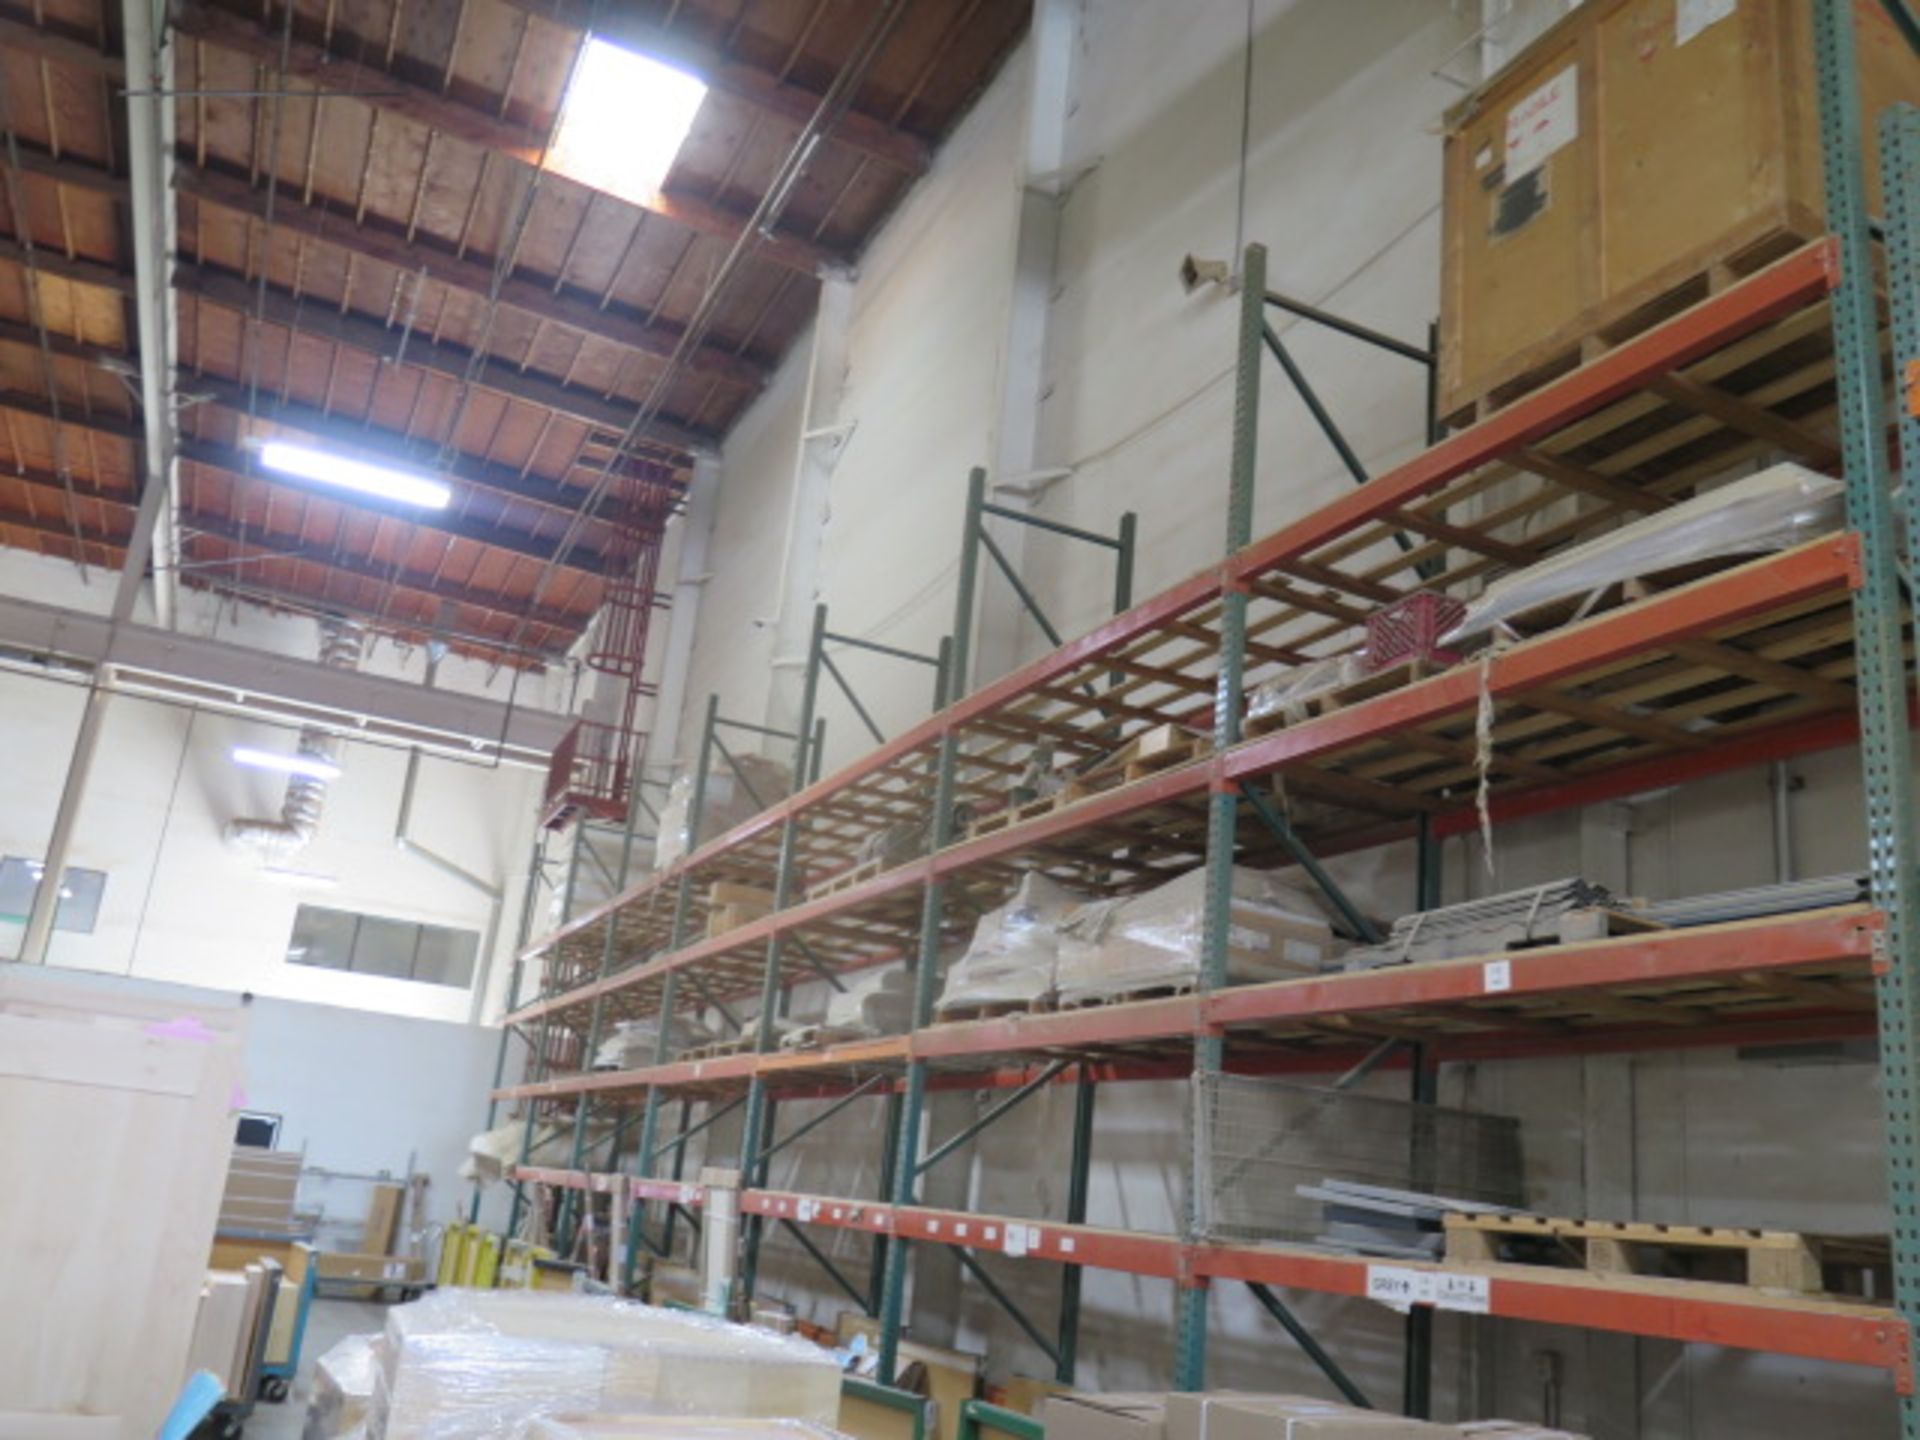 Pallet Racking 7-Sections - Tall (SOLD AS-IS - NO WARRANTY)